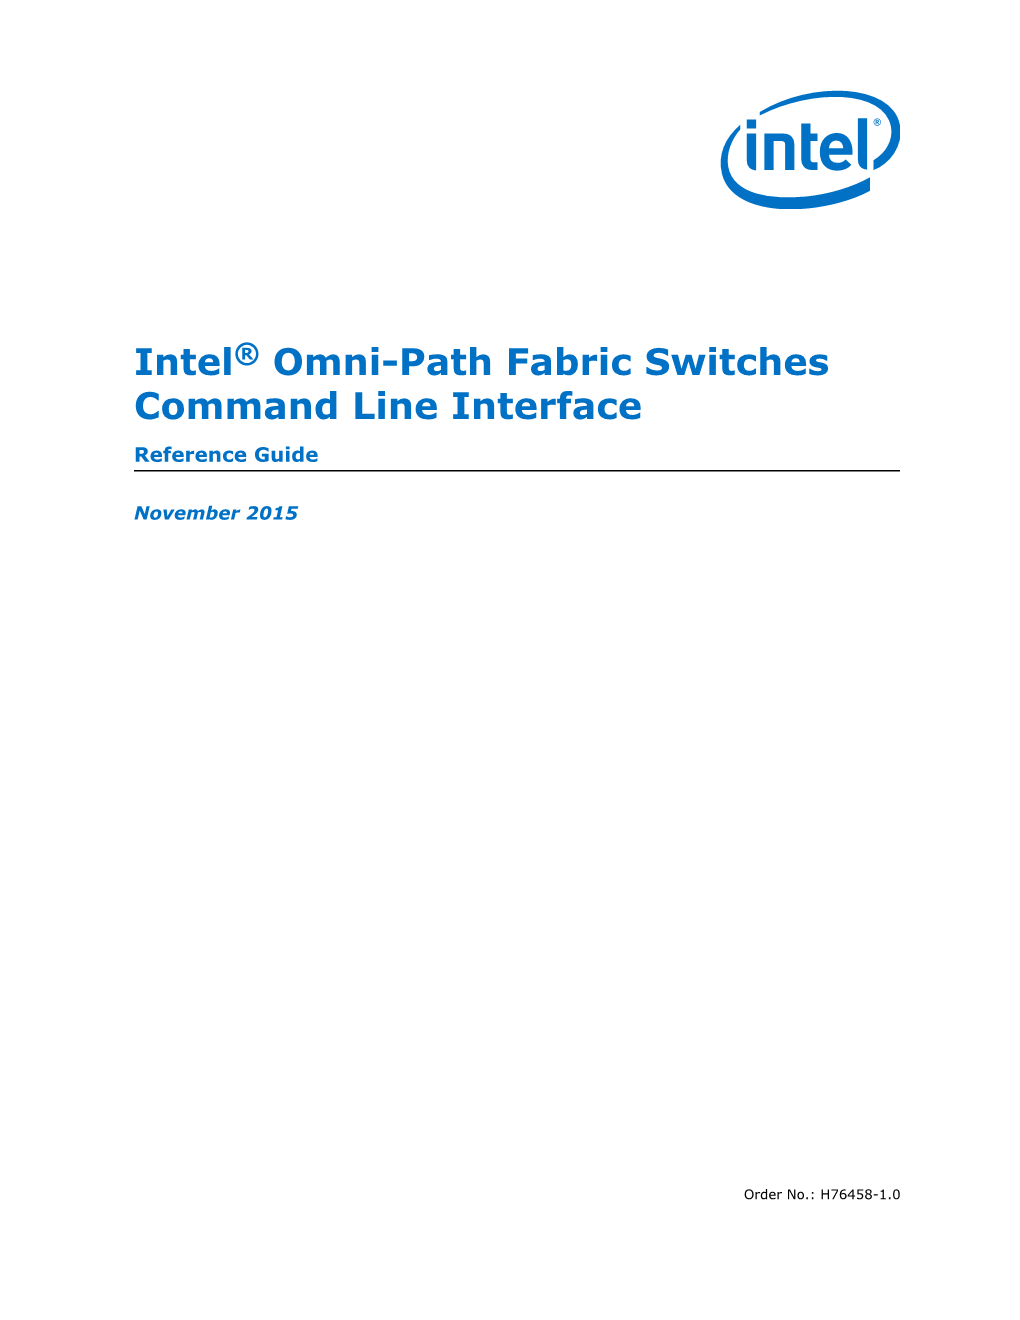 Intel® Omni-Path Fabric Switches Command Line Interface — Reference Guide